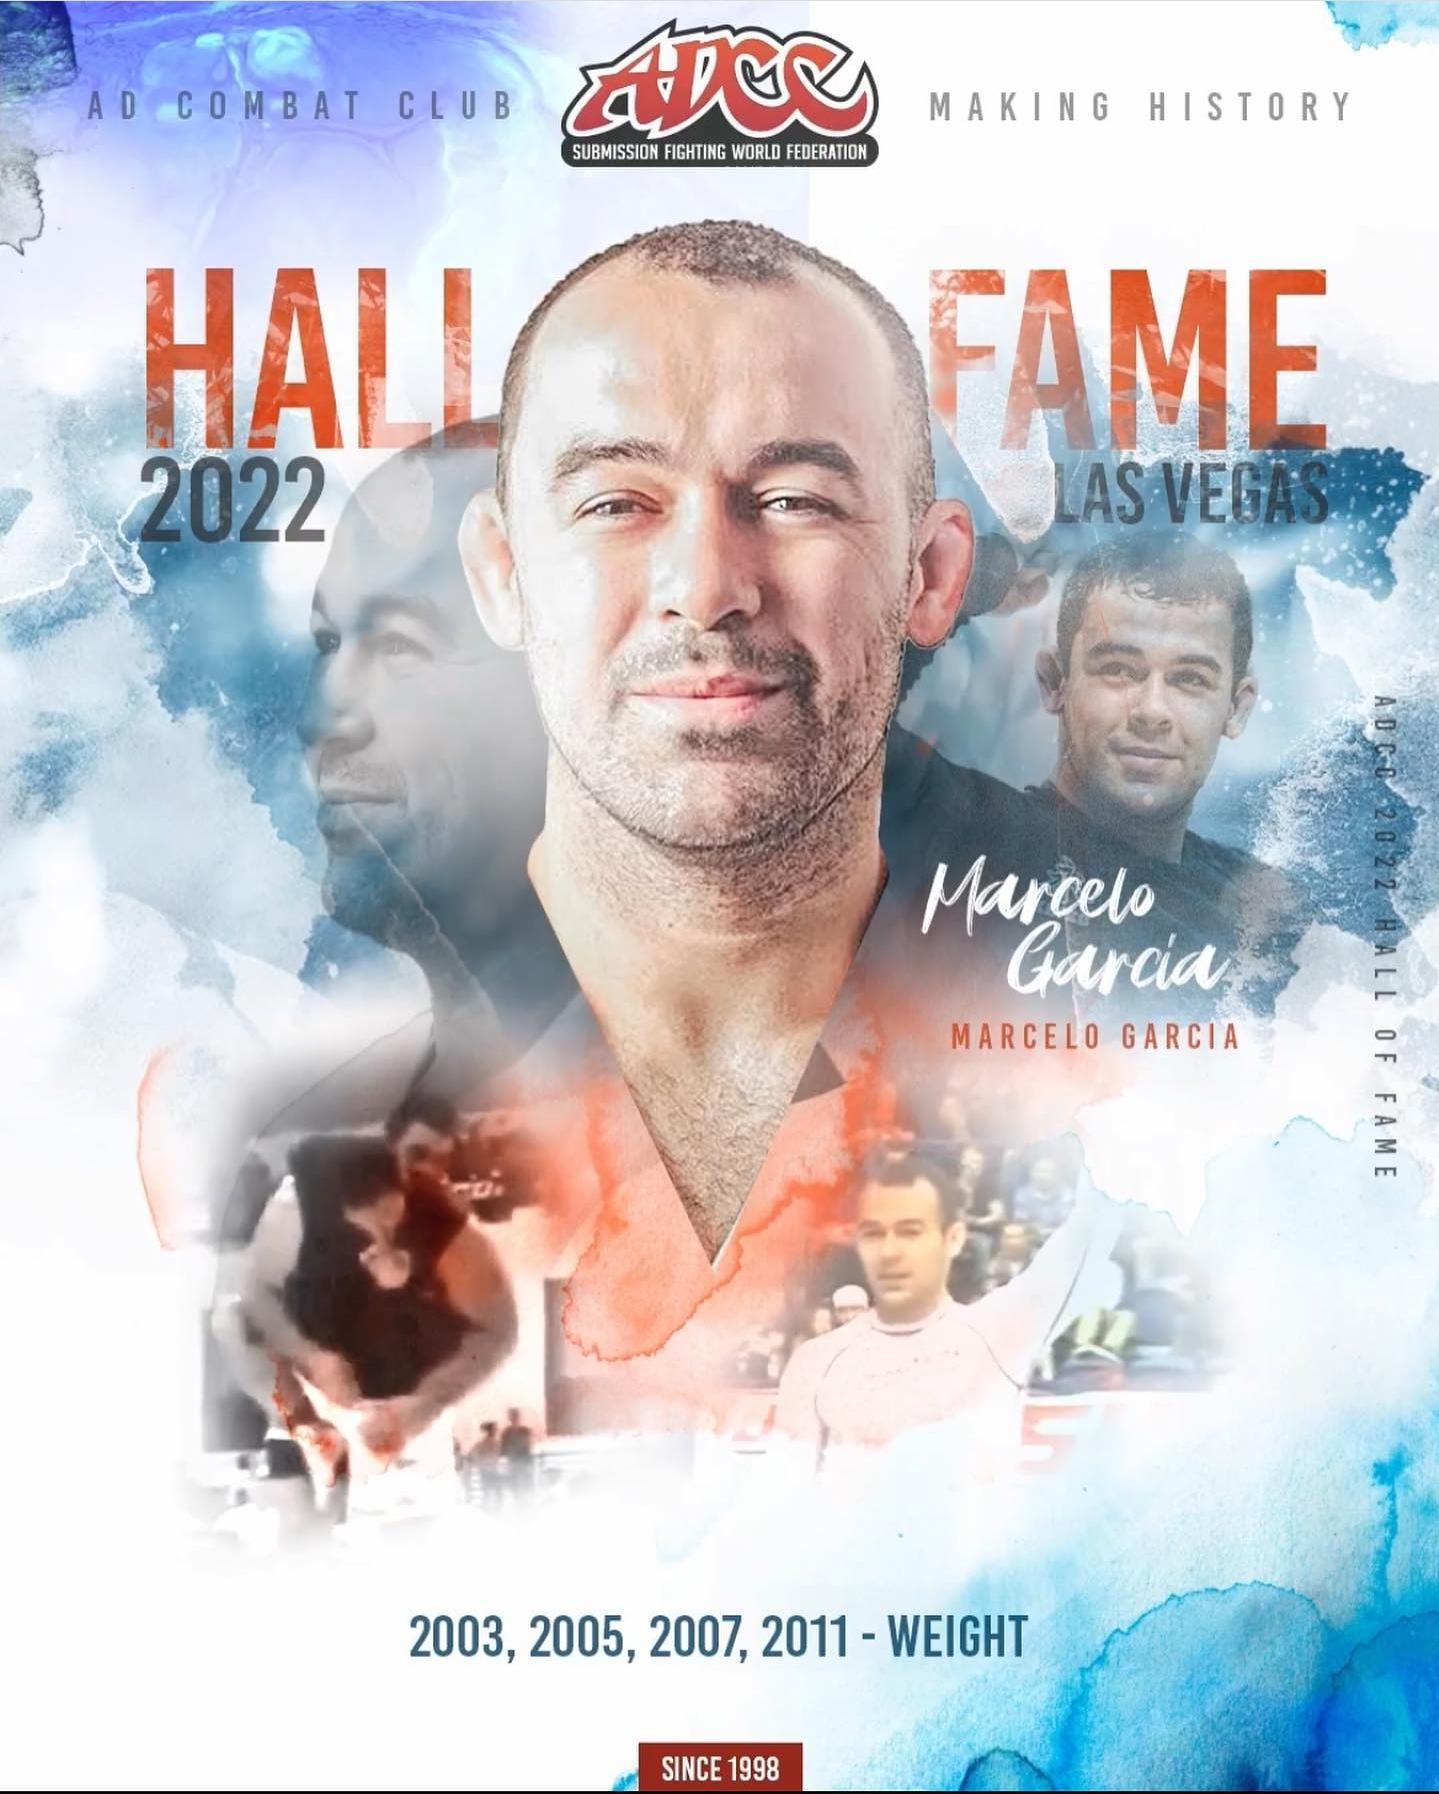 Marcelo Garcia Added To ADCC Hall of Fame